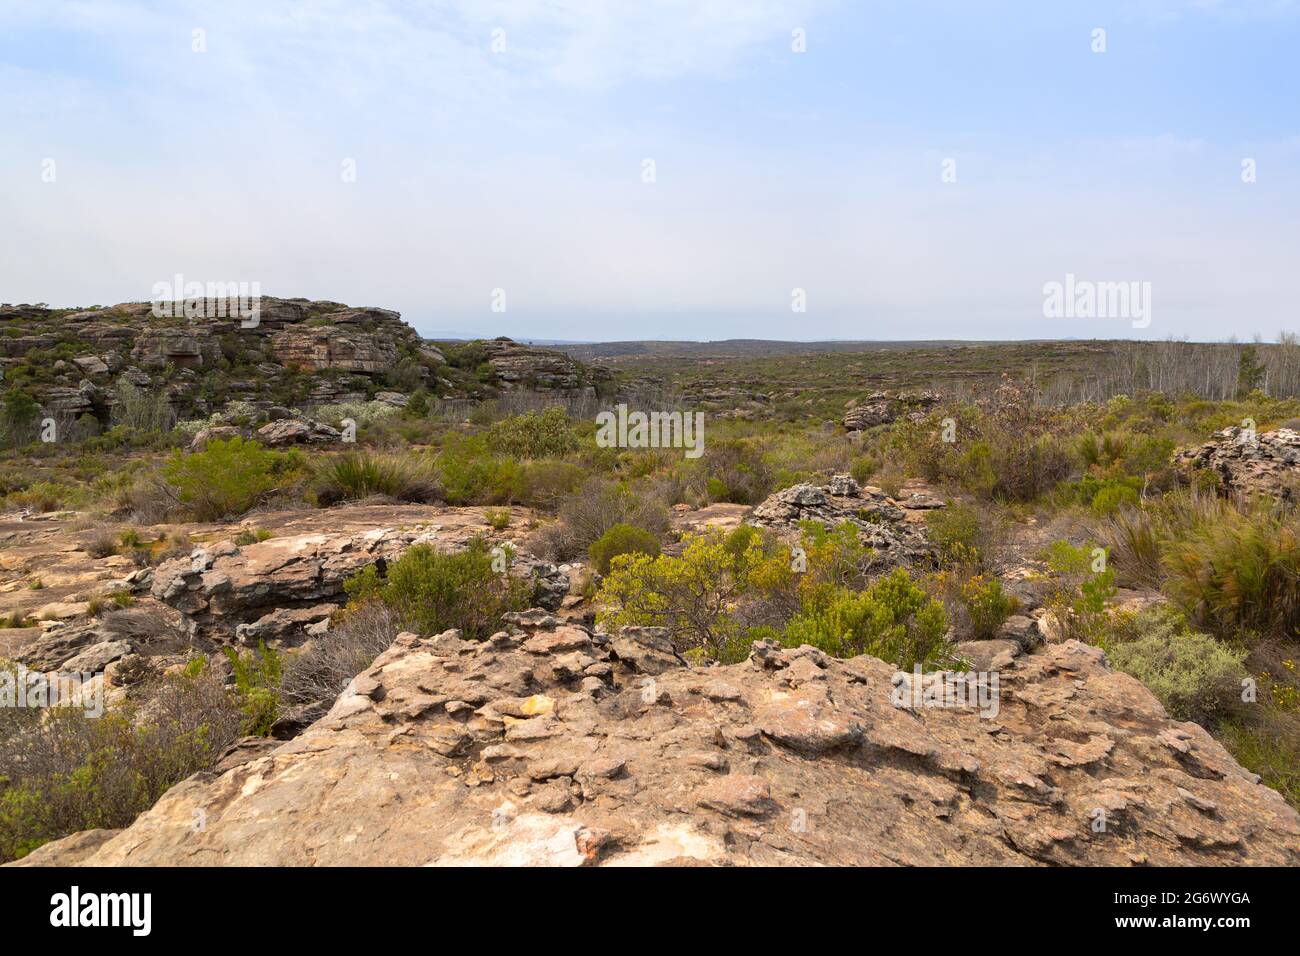 Landscape in the Oorlogskloof Nature Reserve close to Nieuwoudtville in the Northern Cape of South Africa Stock Photo